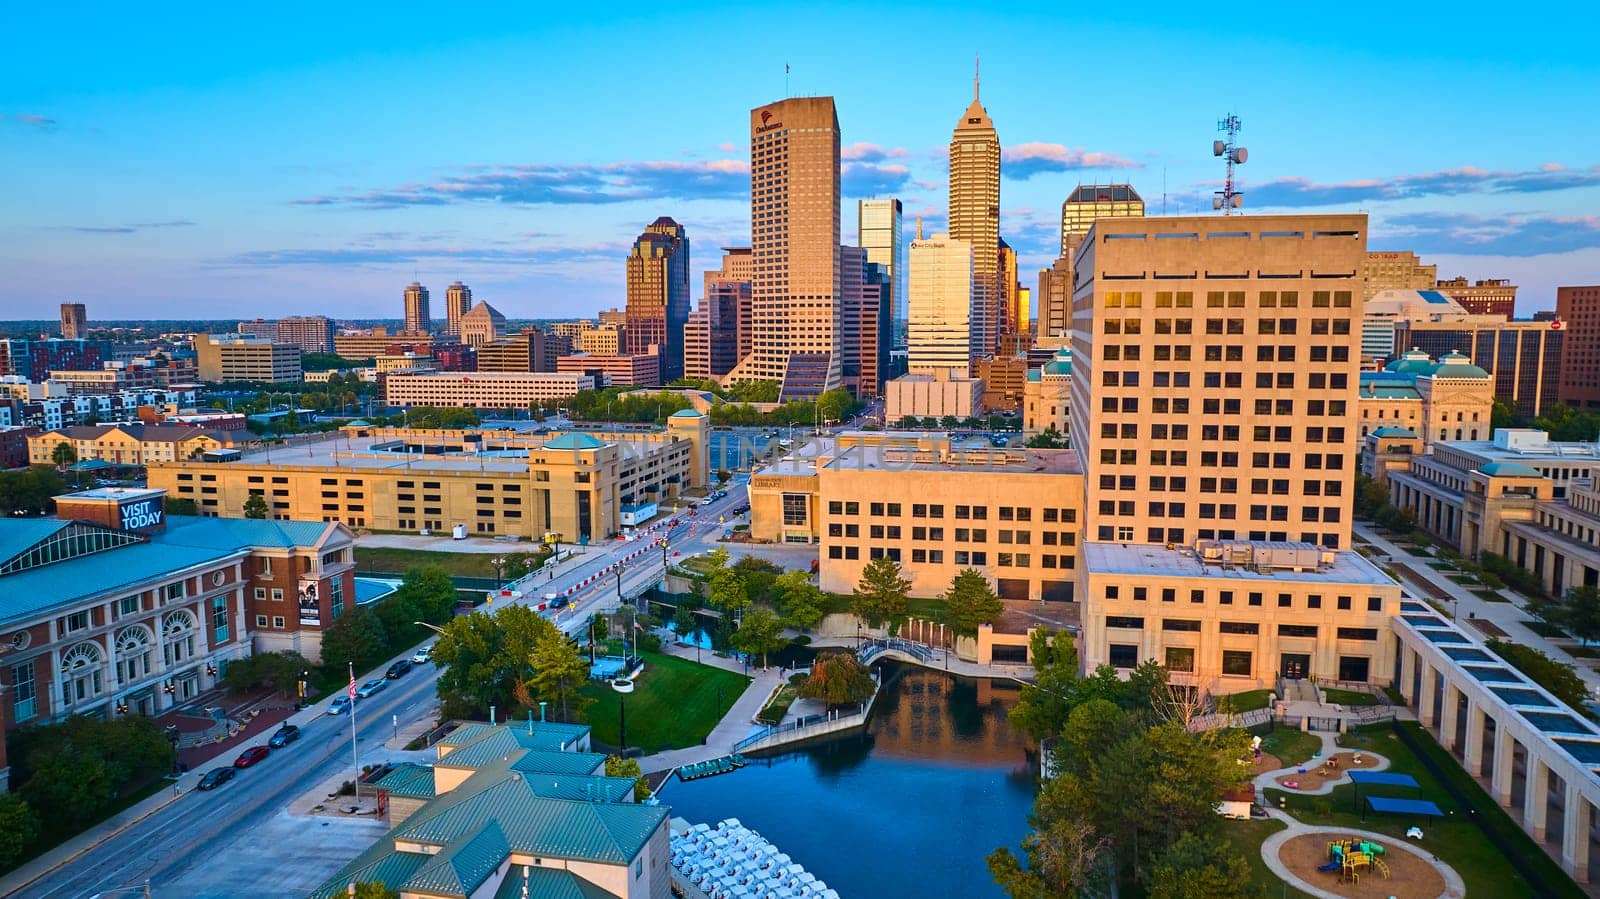 Aerial view of Indianapolis cityscape bathed in golden hour glow, highlighting urban planning with river intersection and recreational spaces.